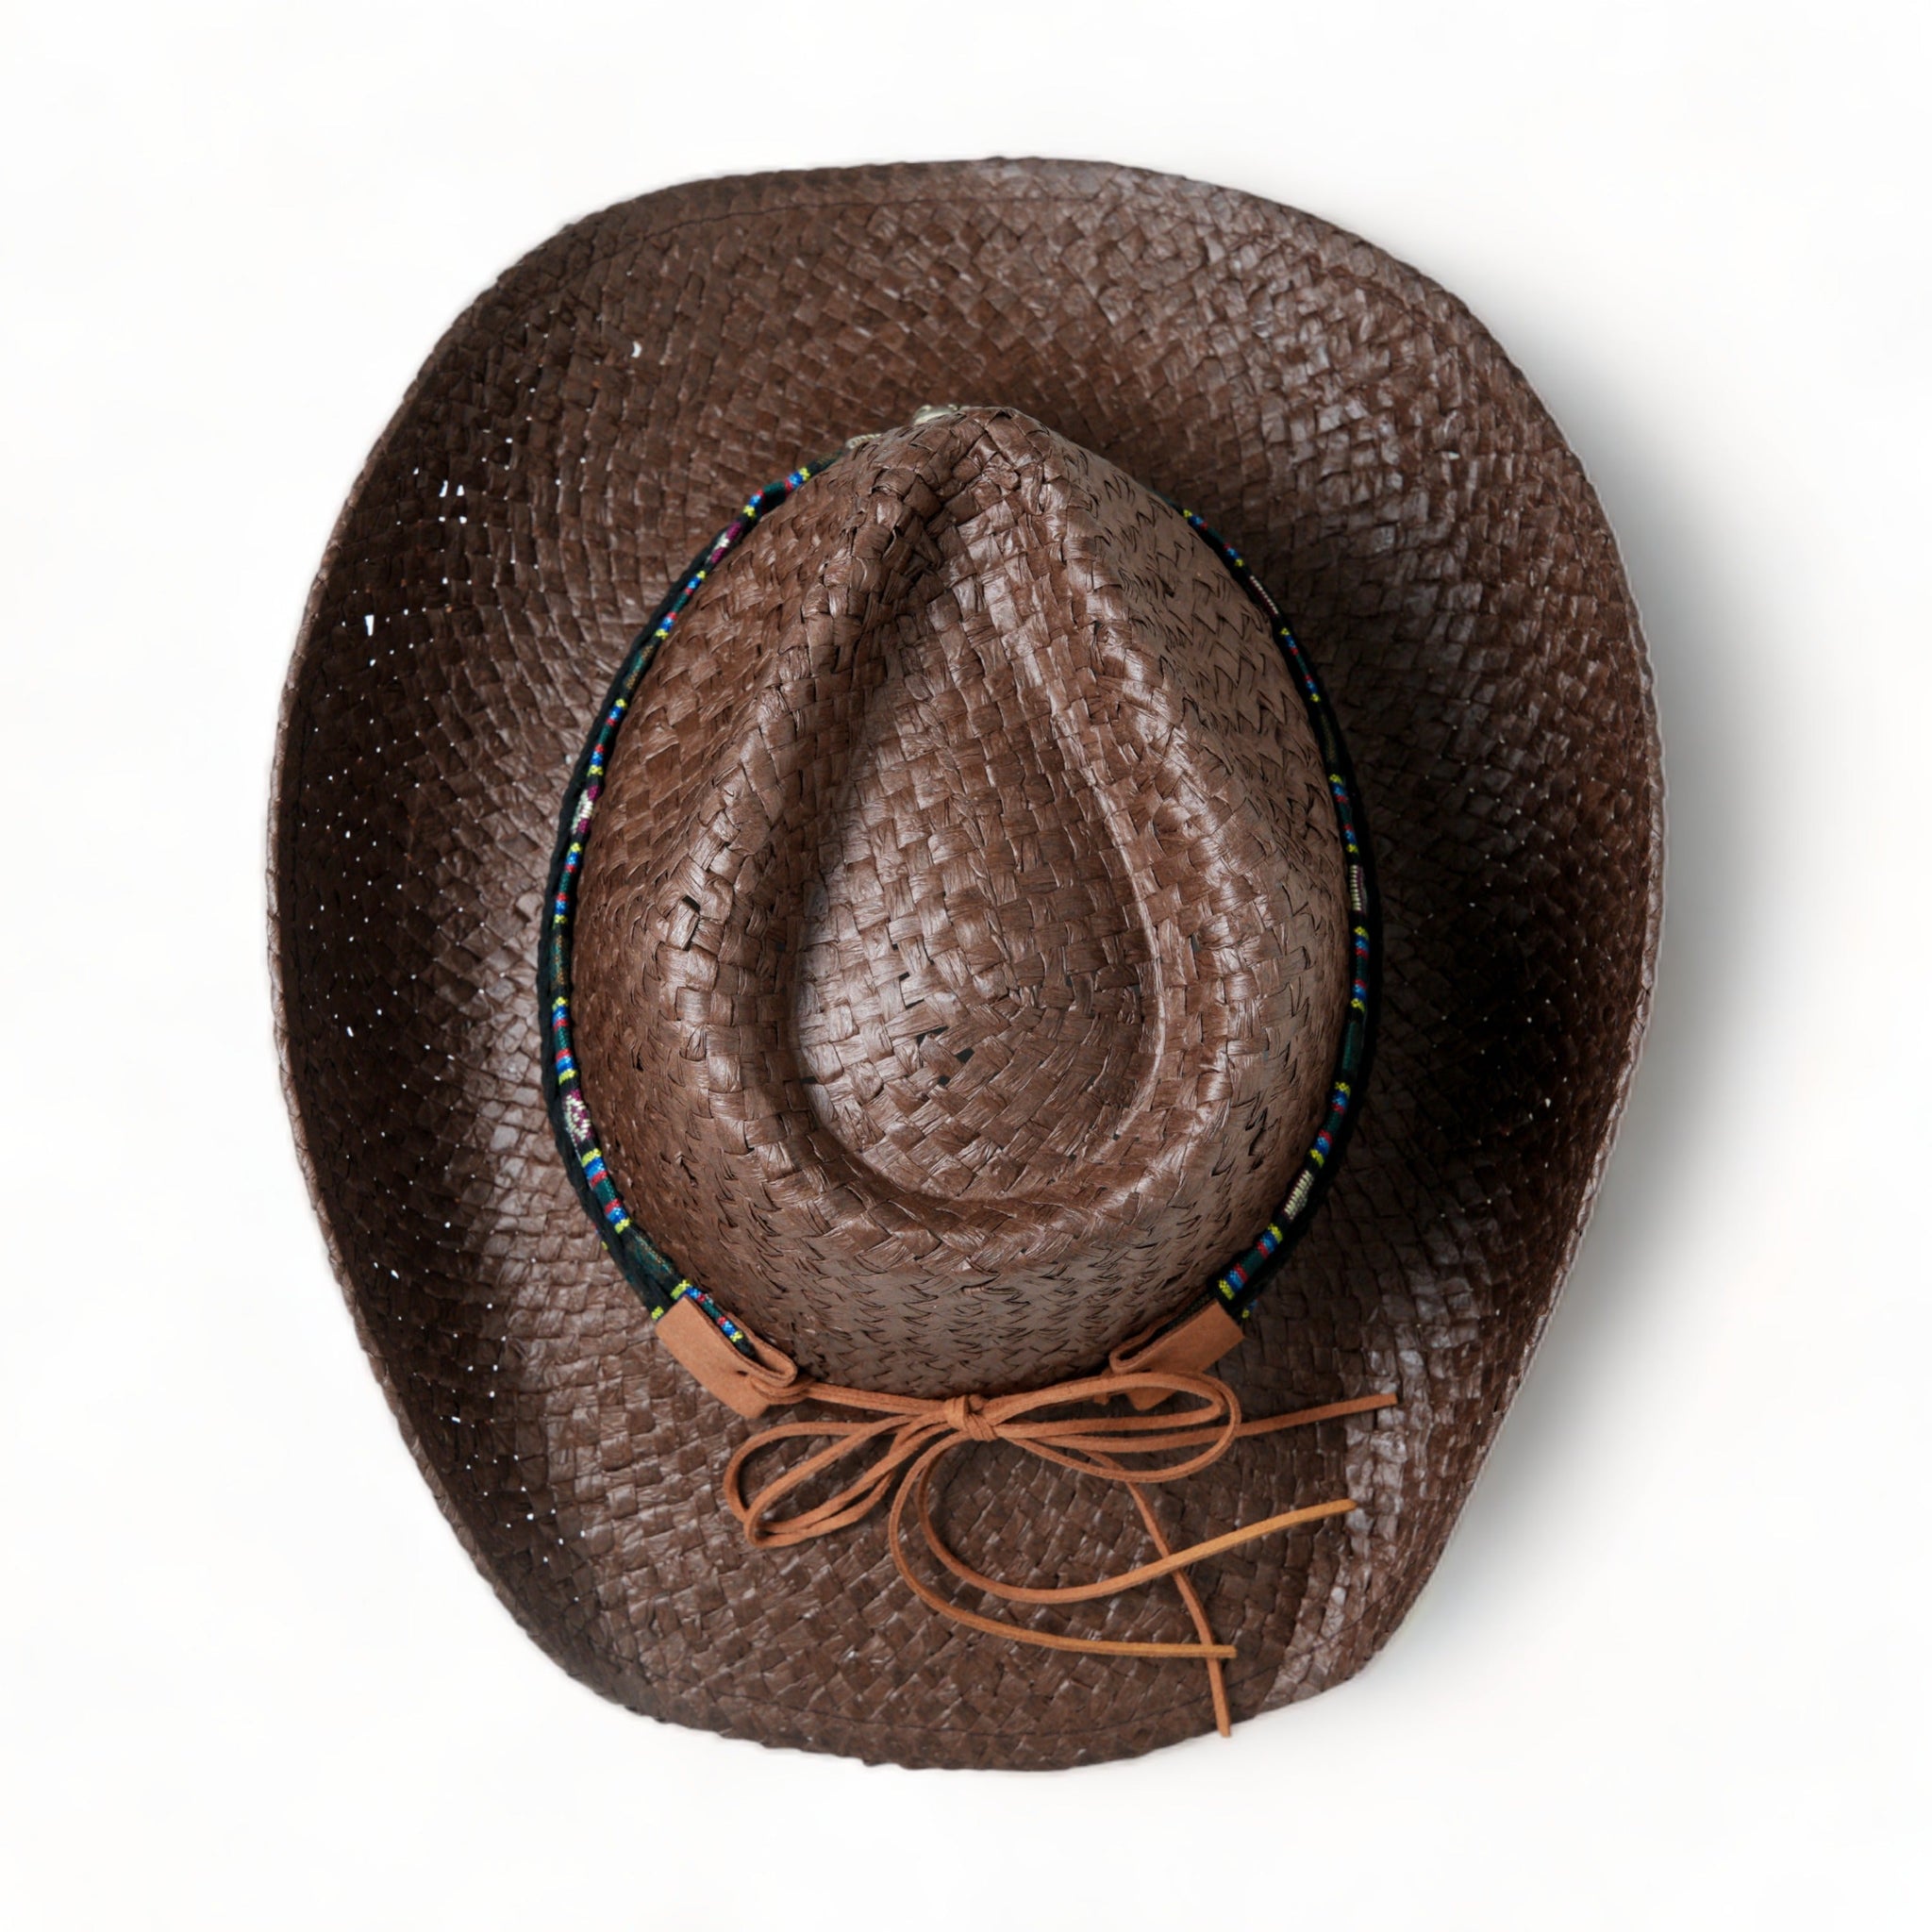 Chokore Handcrafted Cowboy Hat with Ox head Belt (Brown)